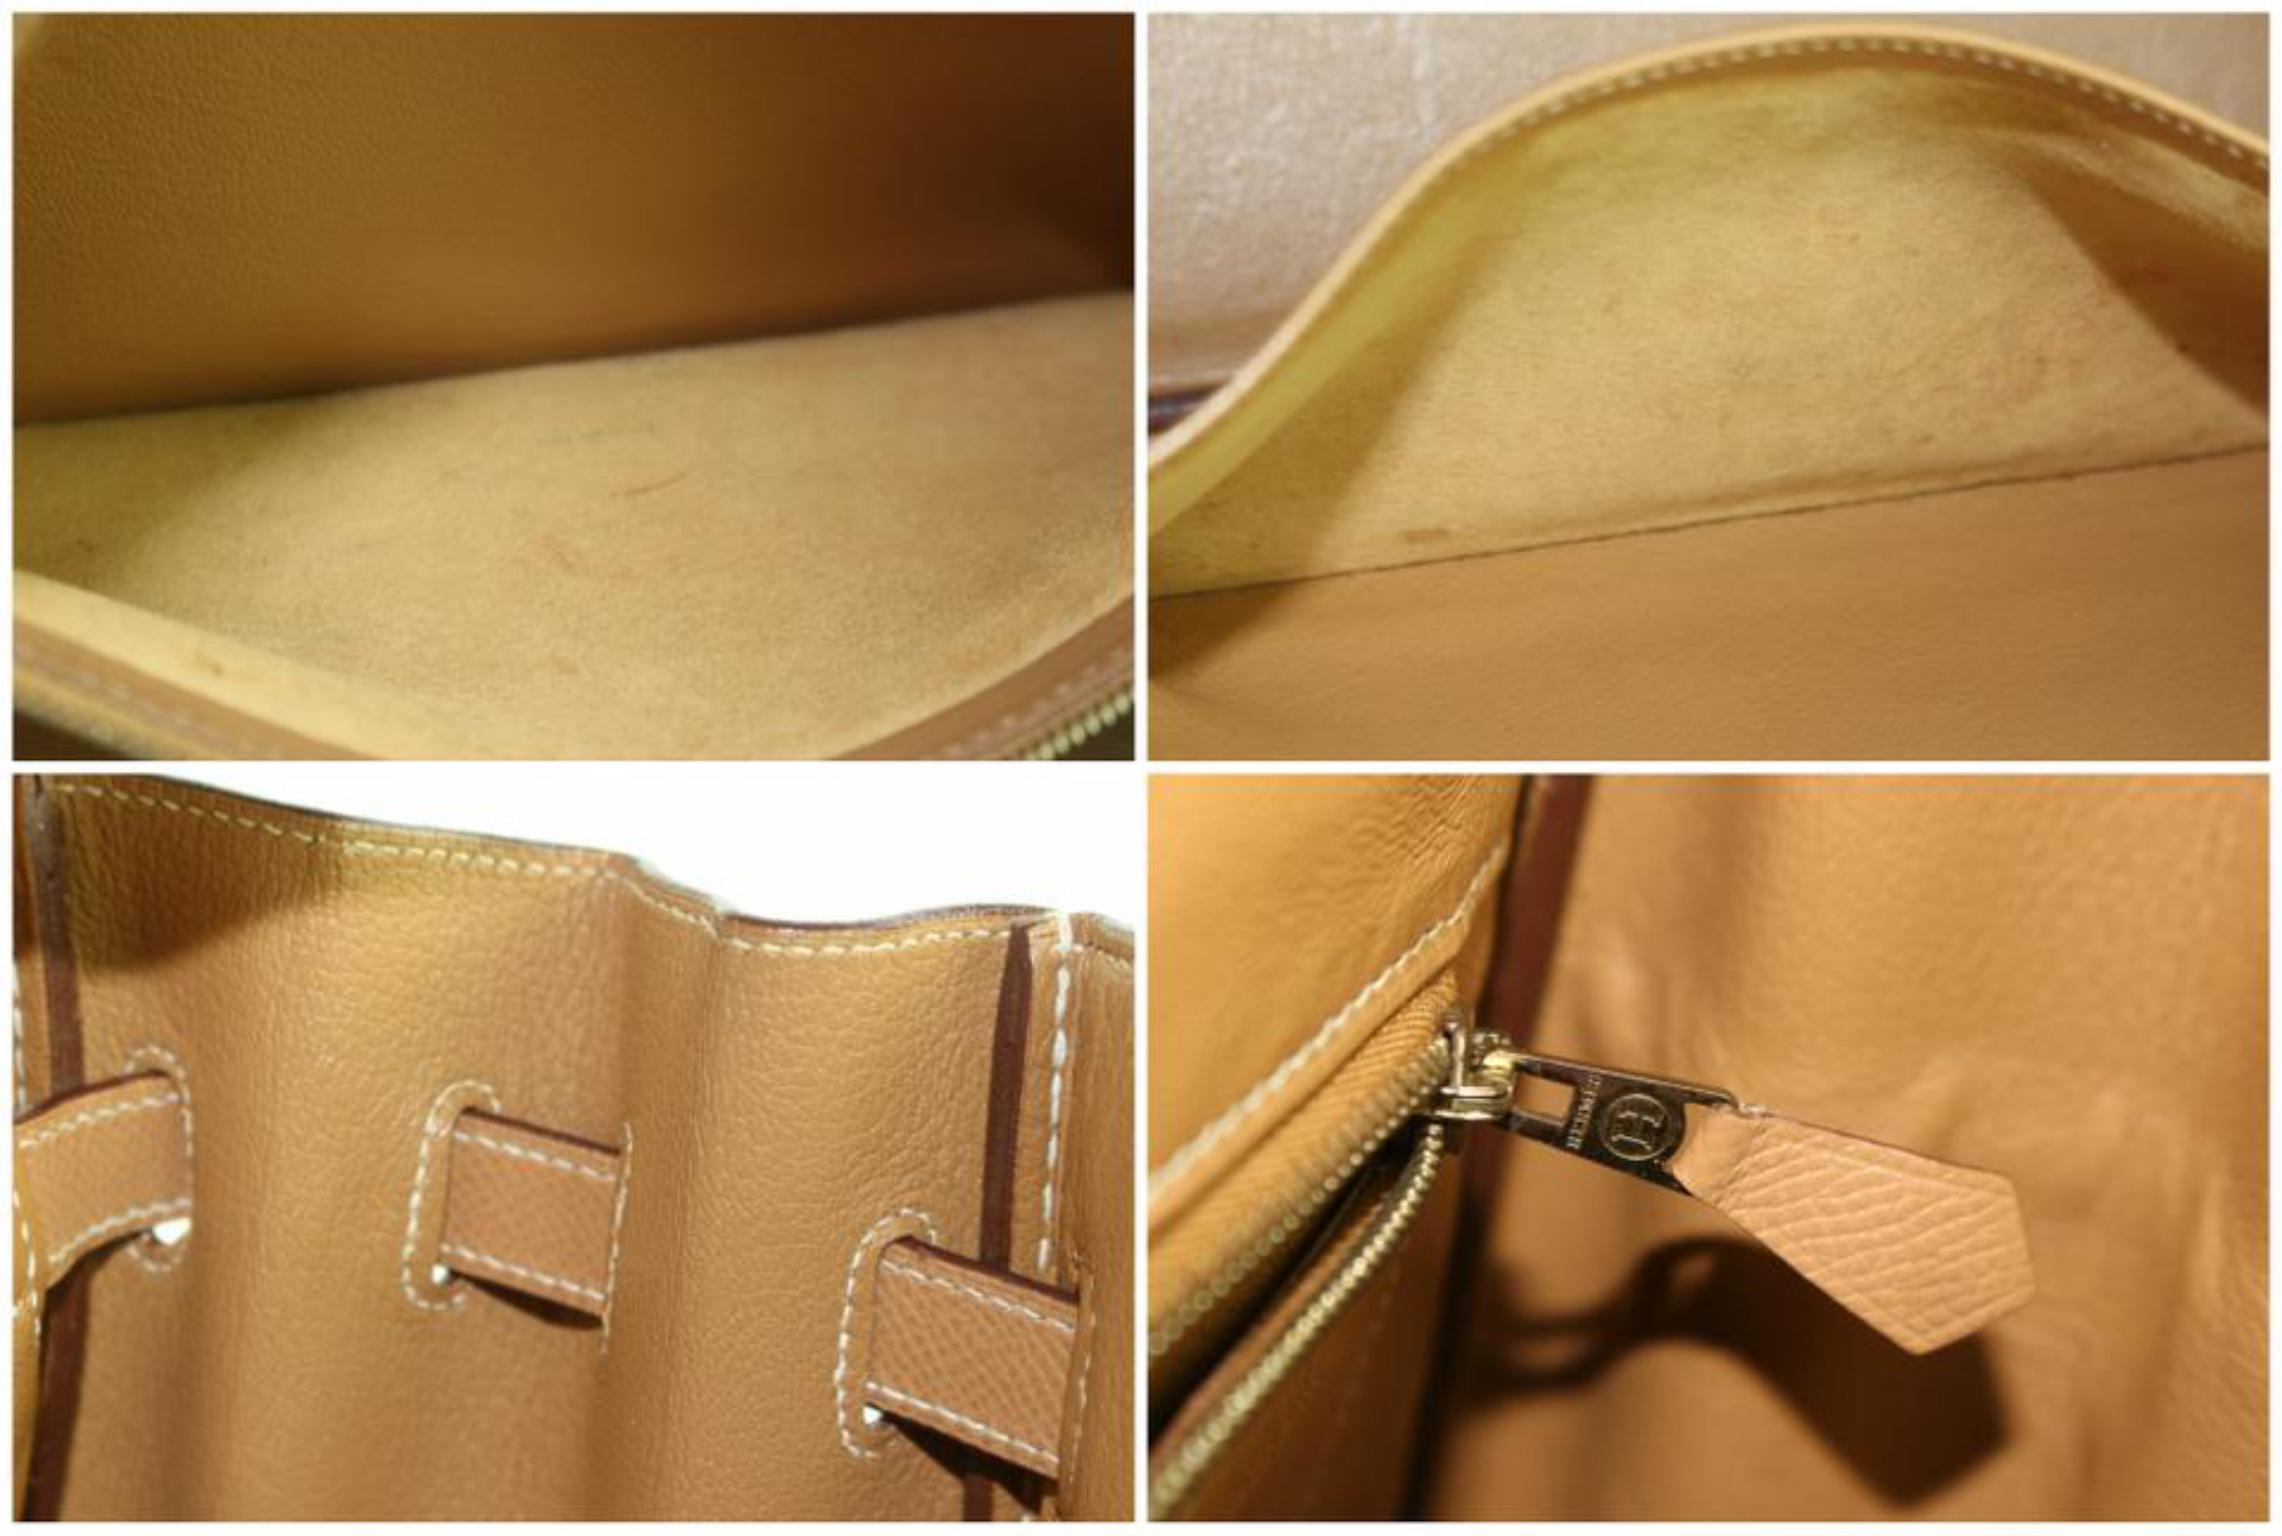 Hermès Birkin Haut à Courroies Gold 32 1hz1130 Brown Leather Satchel In Good Condition For Sale In Forest Hills, NY